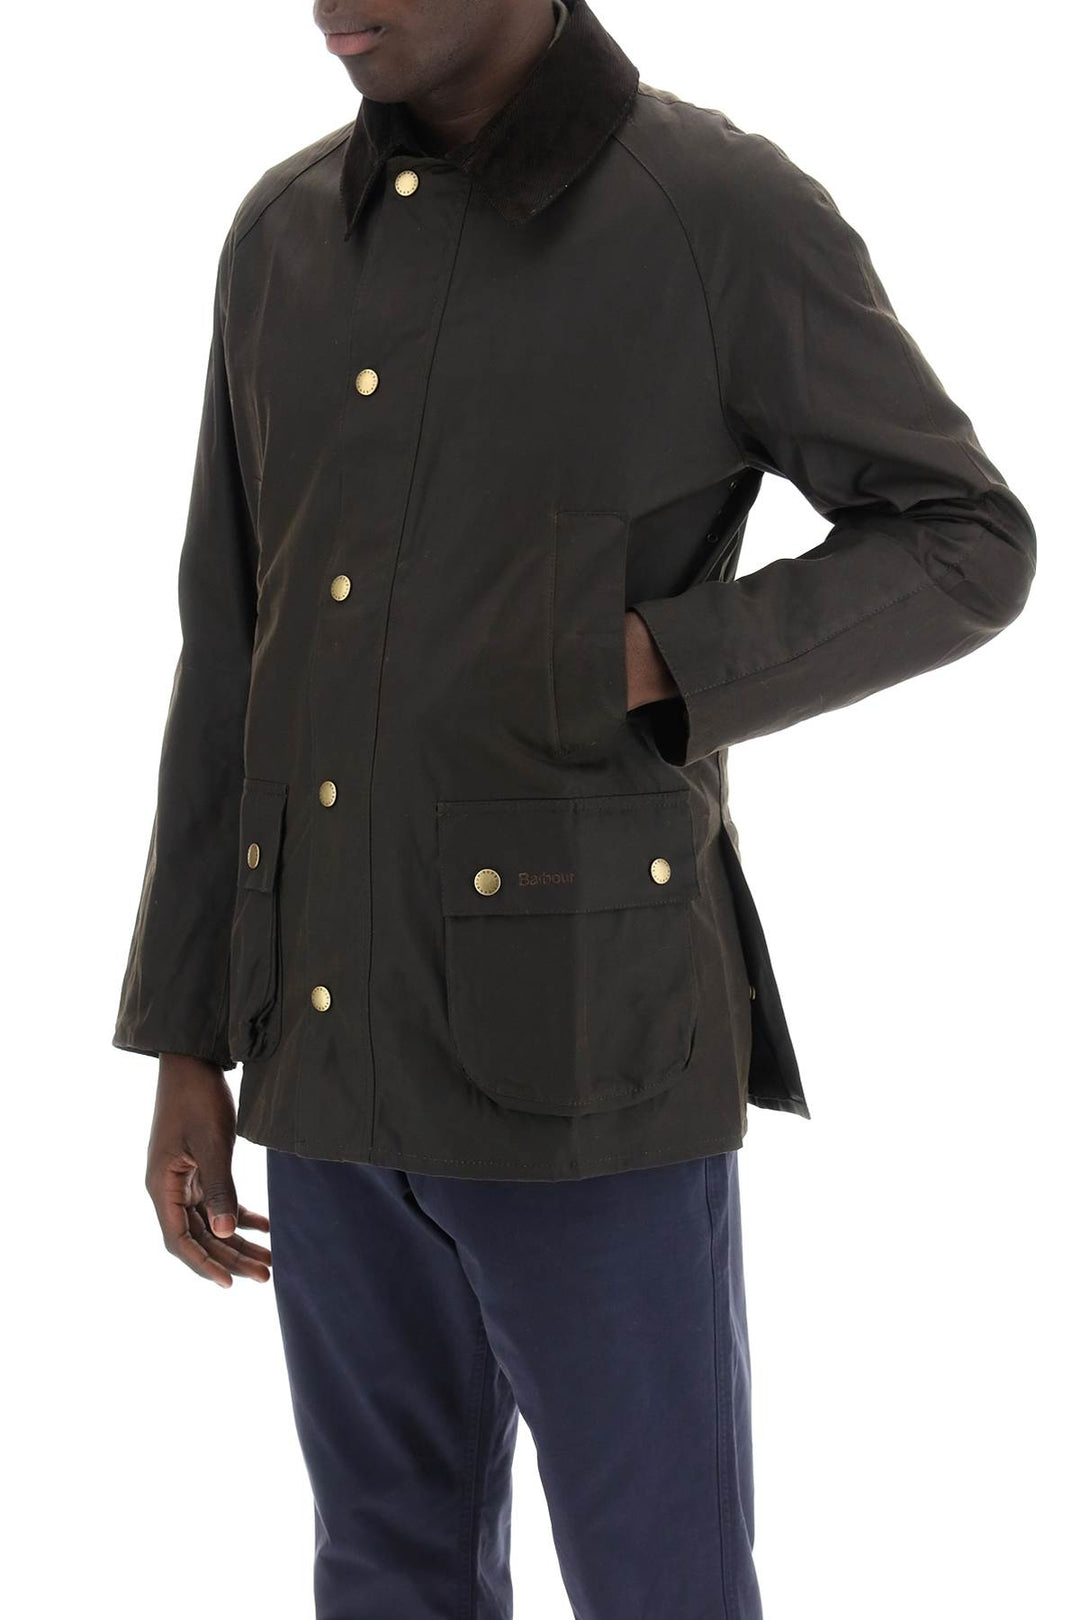 Barbour Ashby Waxed Jacket   Verde